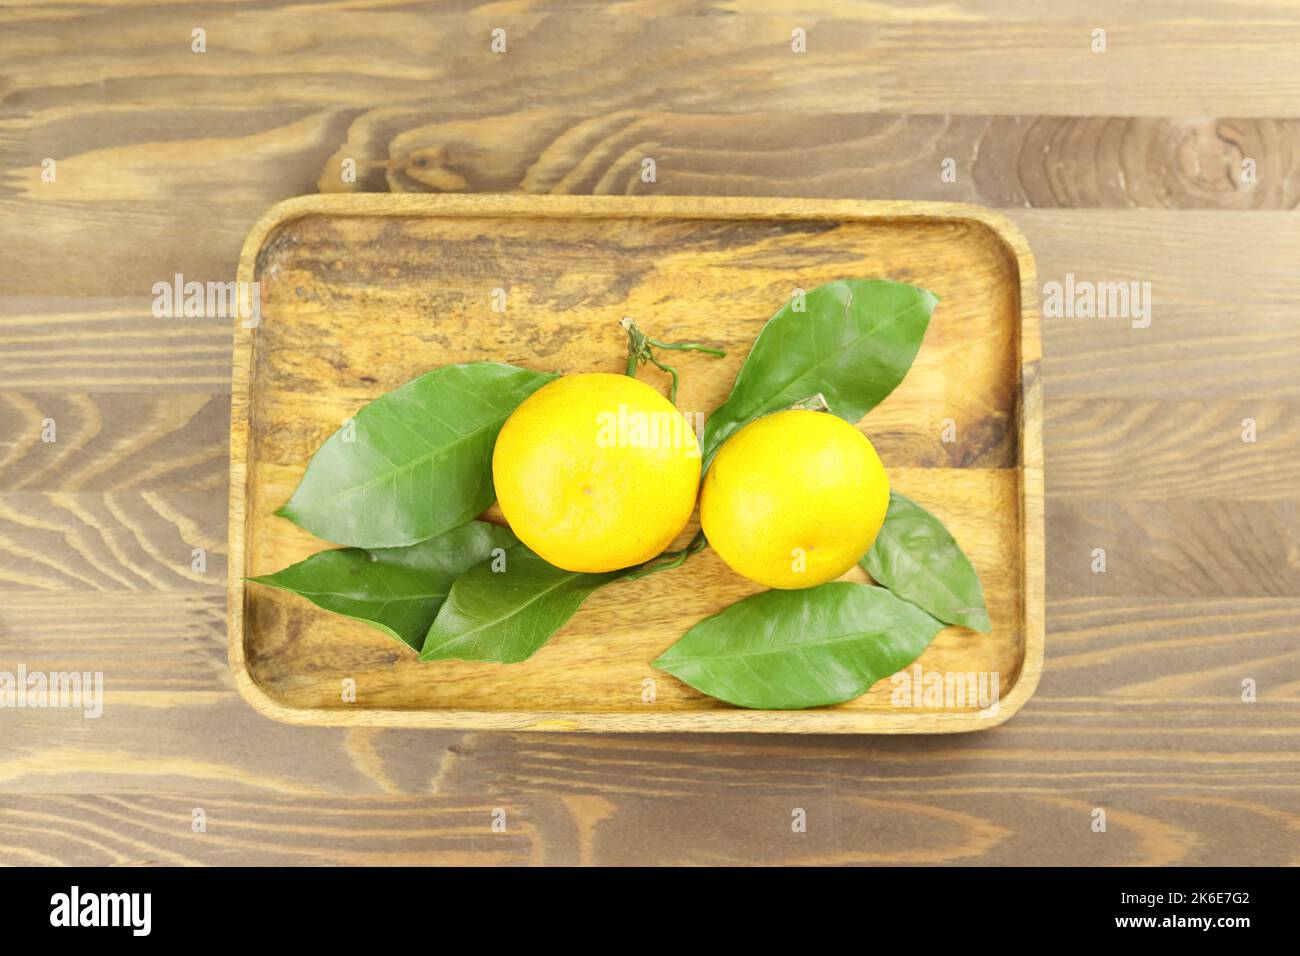 Yellow whole mandarins or tangerine fruits on green leaves on wooden tray. Close-up. Stock Photo